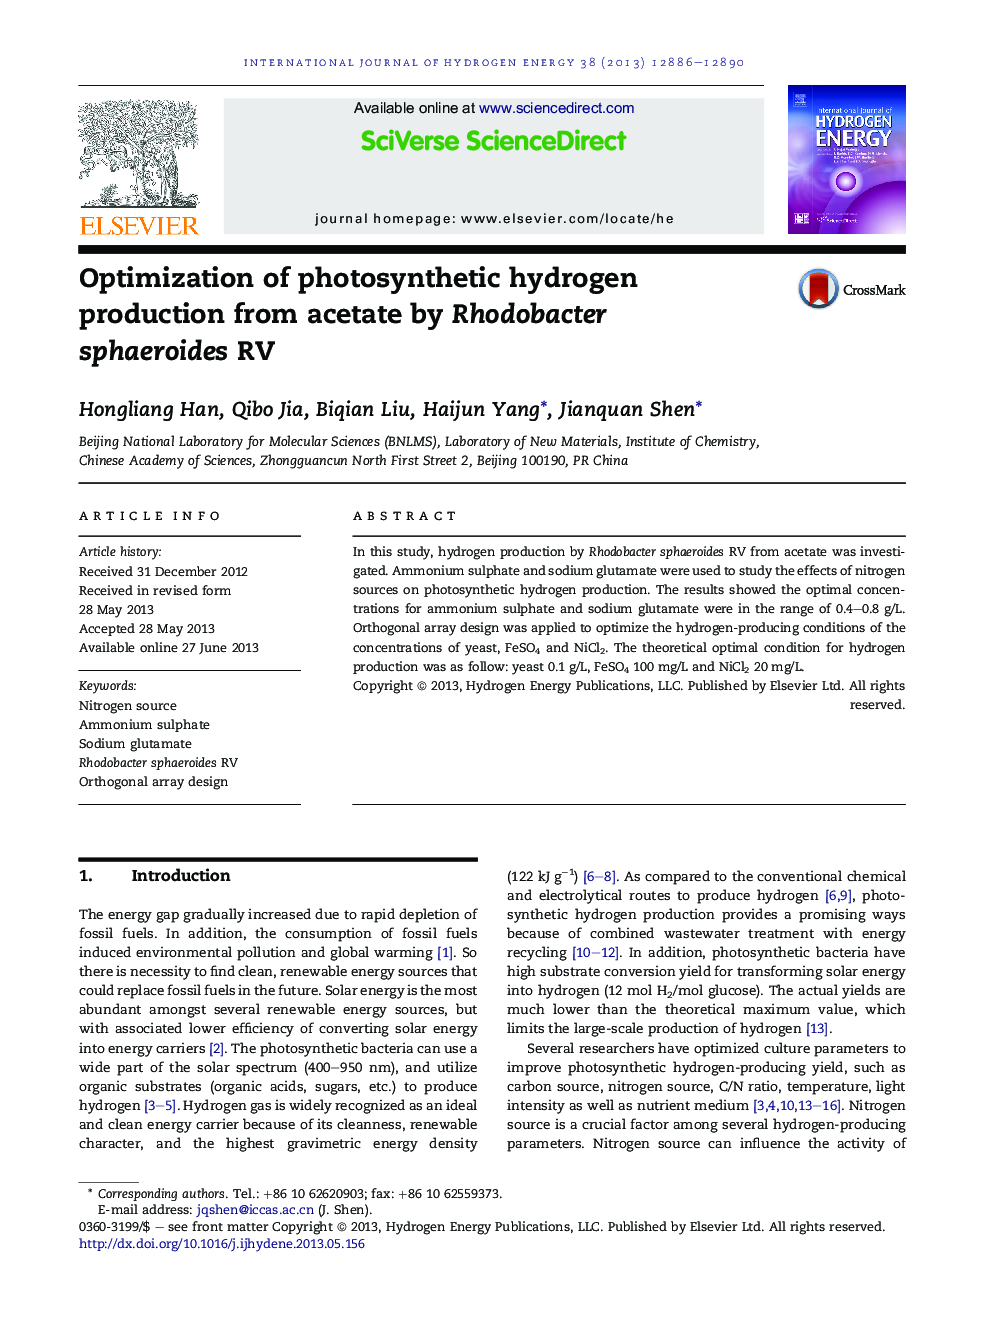 Optimization of photosynthetic hydrogen production from acetate by Rhodobacter sphaeroides RV